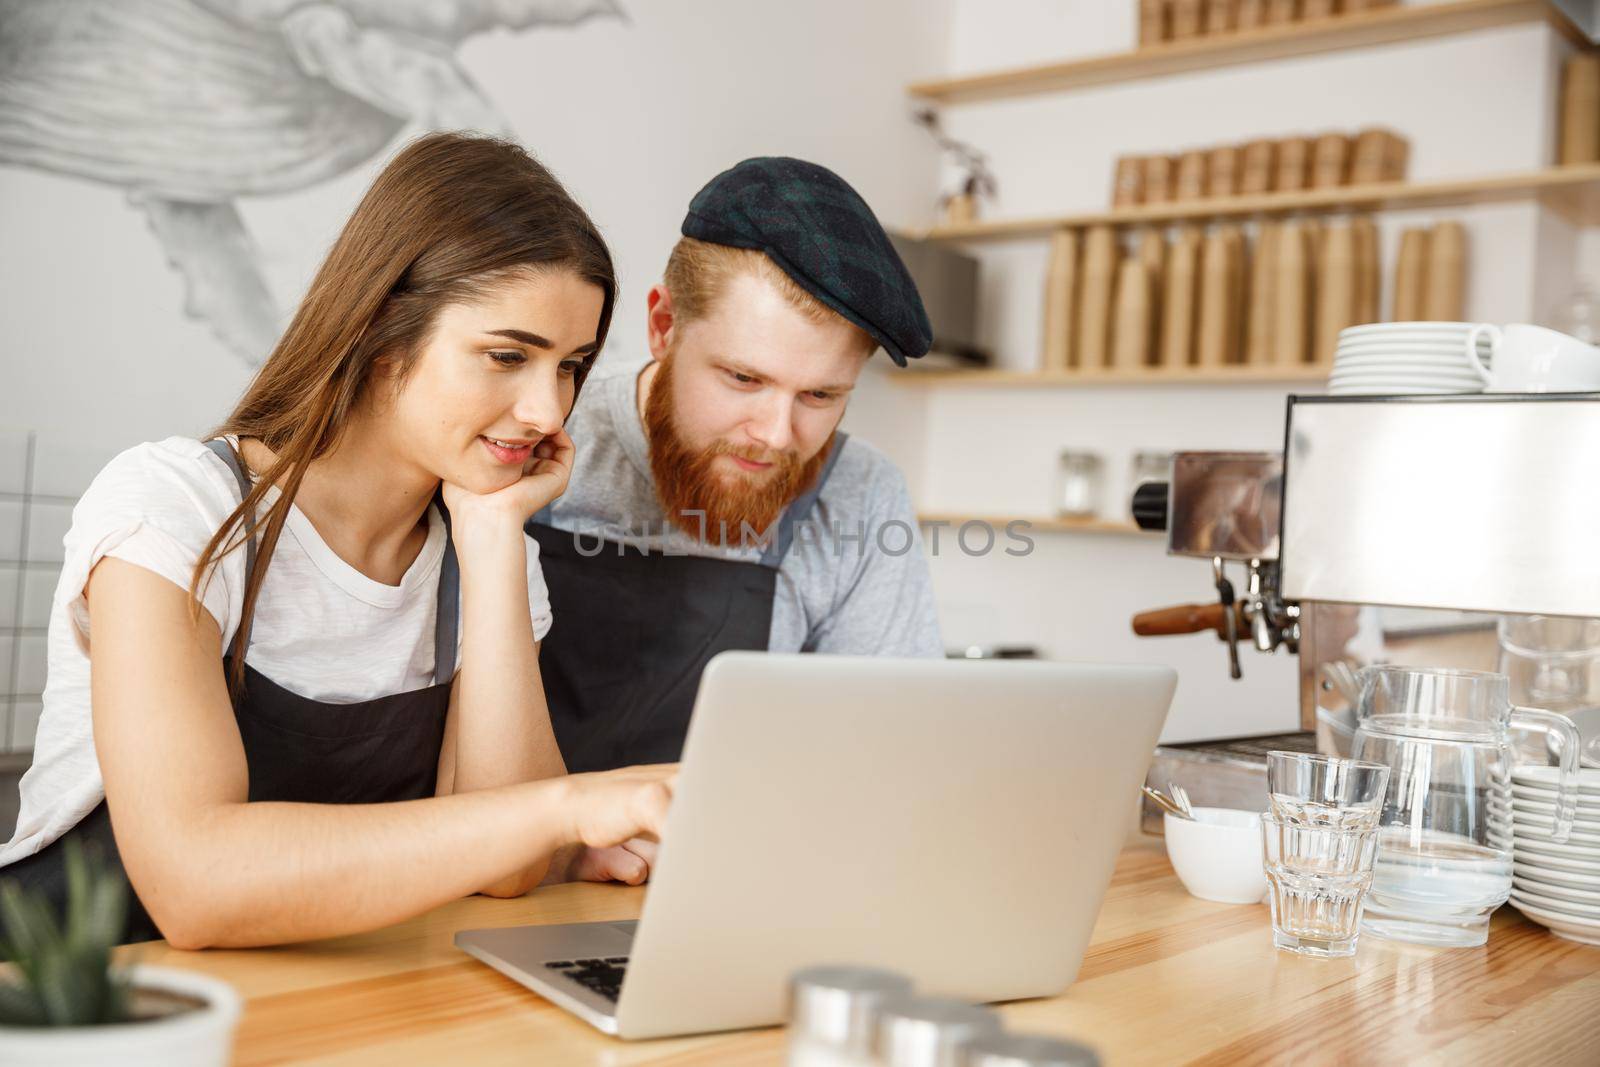 Coffee Business Concept - Satisfied and smile owners look on laptop for online orders at coffee shop